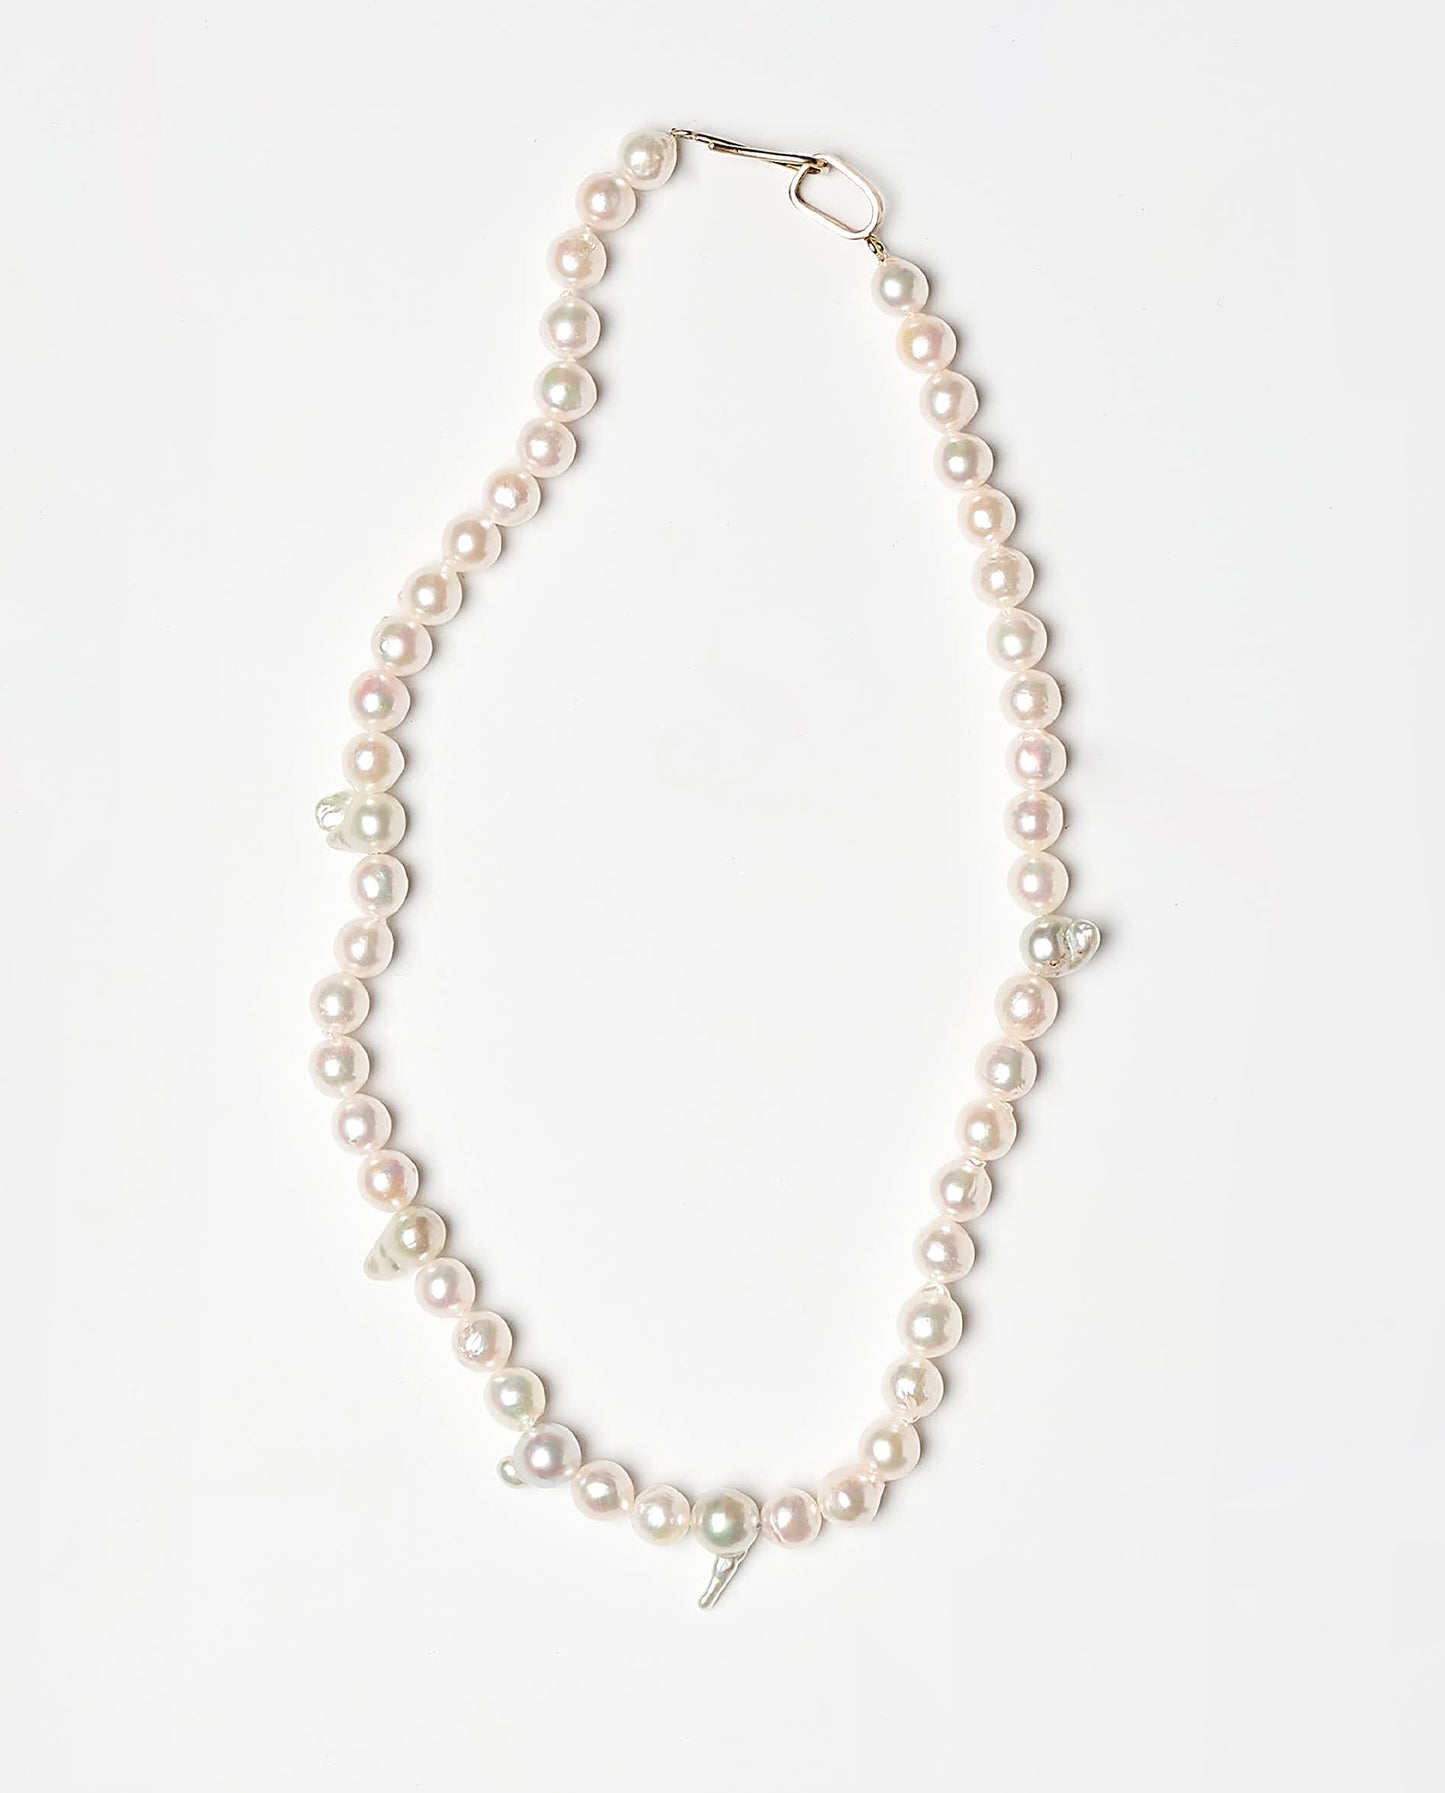 Defined Silhouette Akoya Pearl Necklace